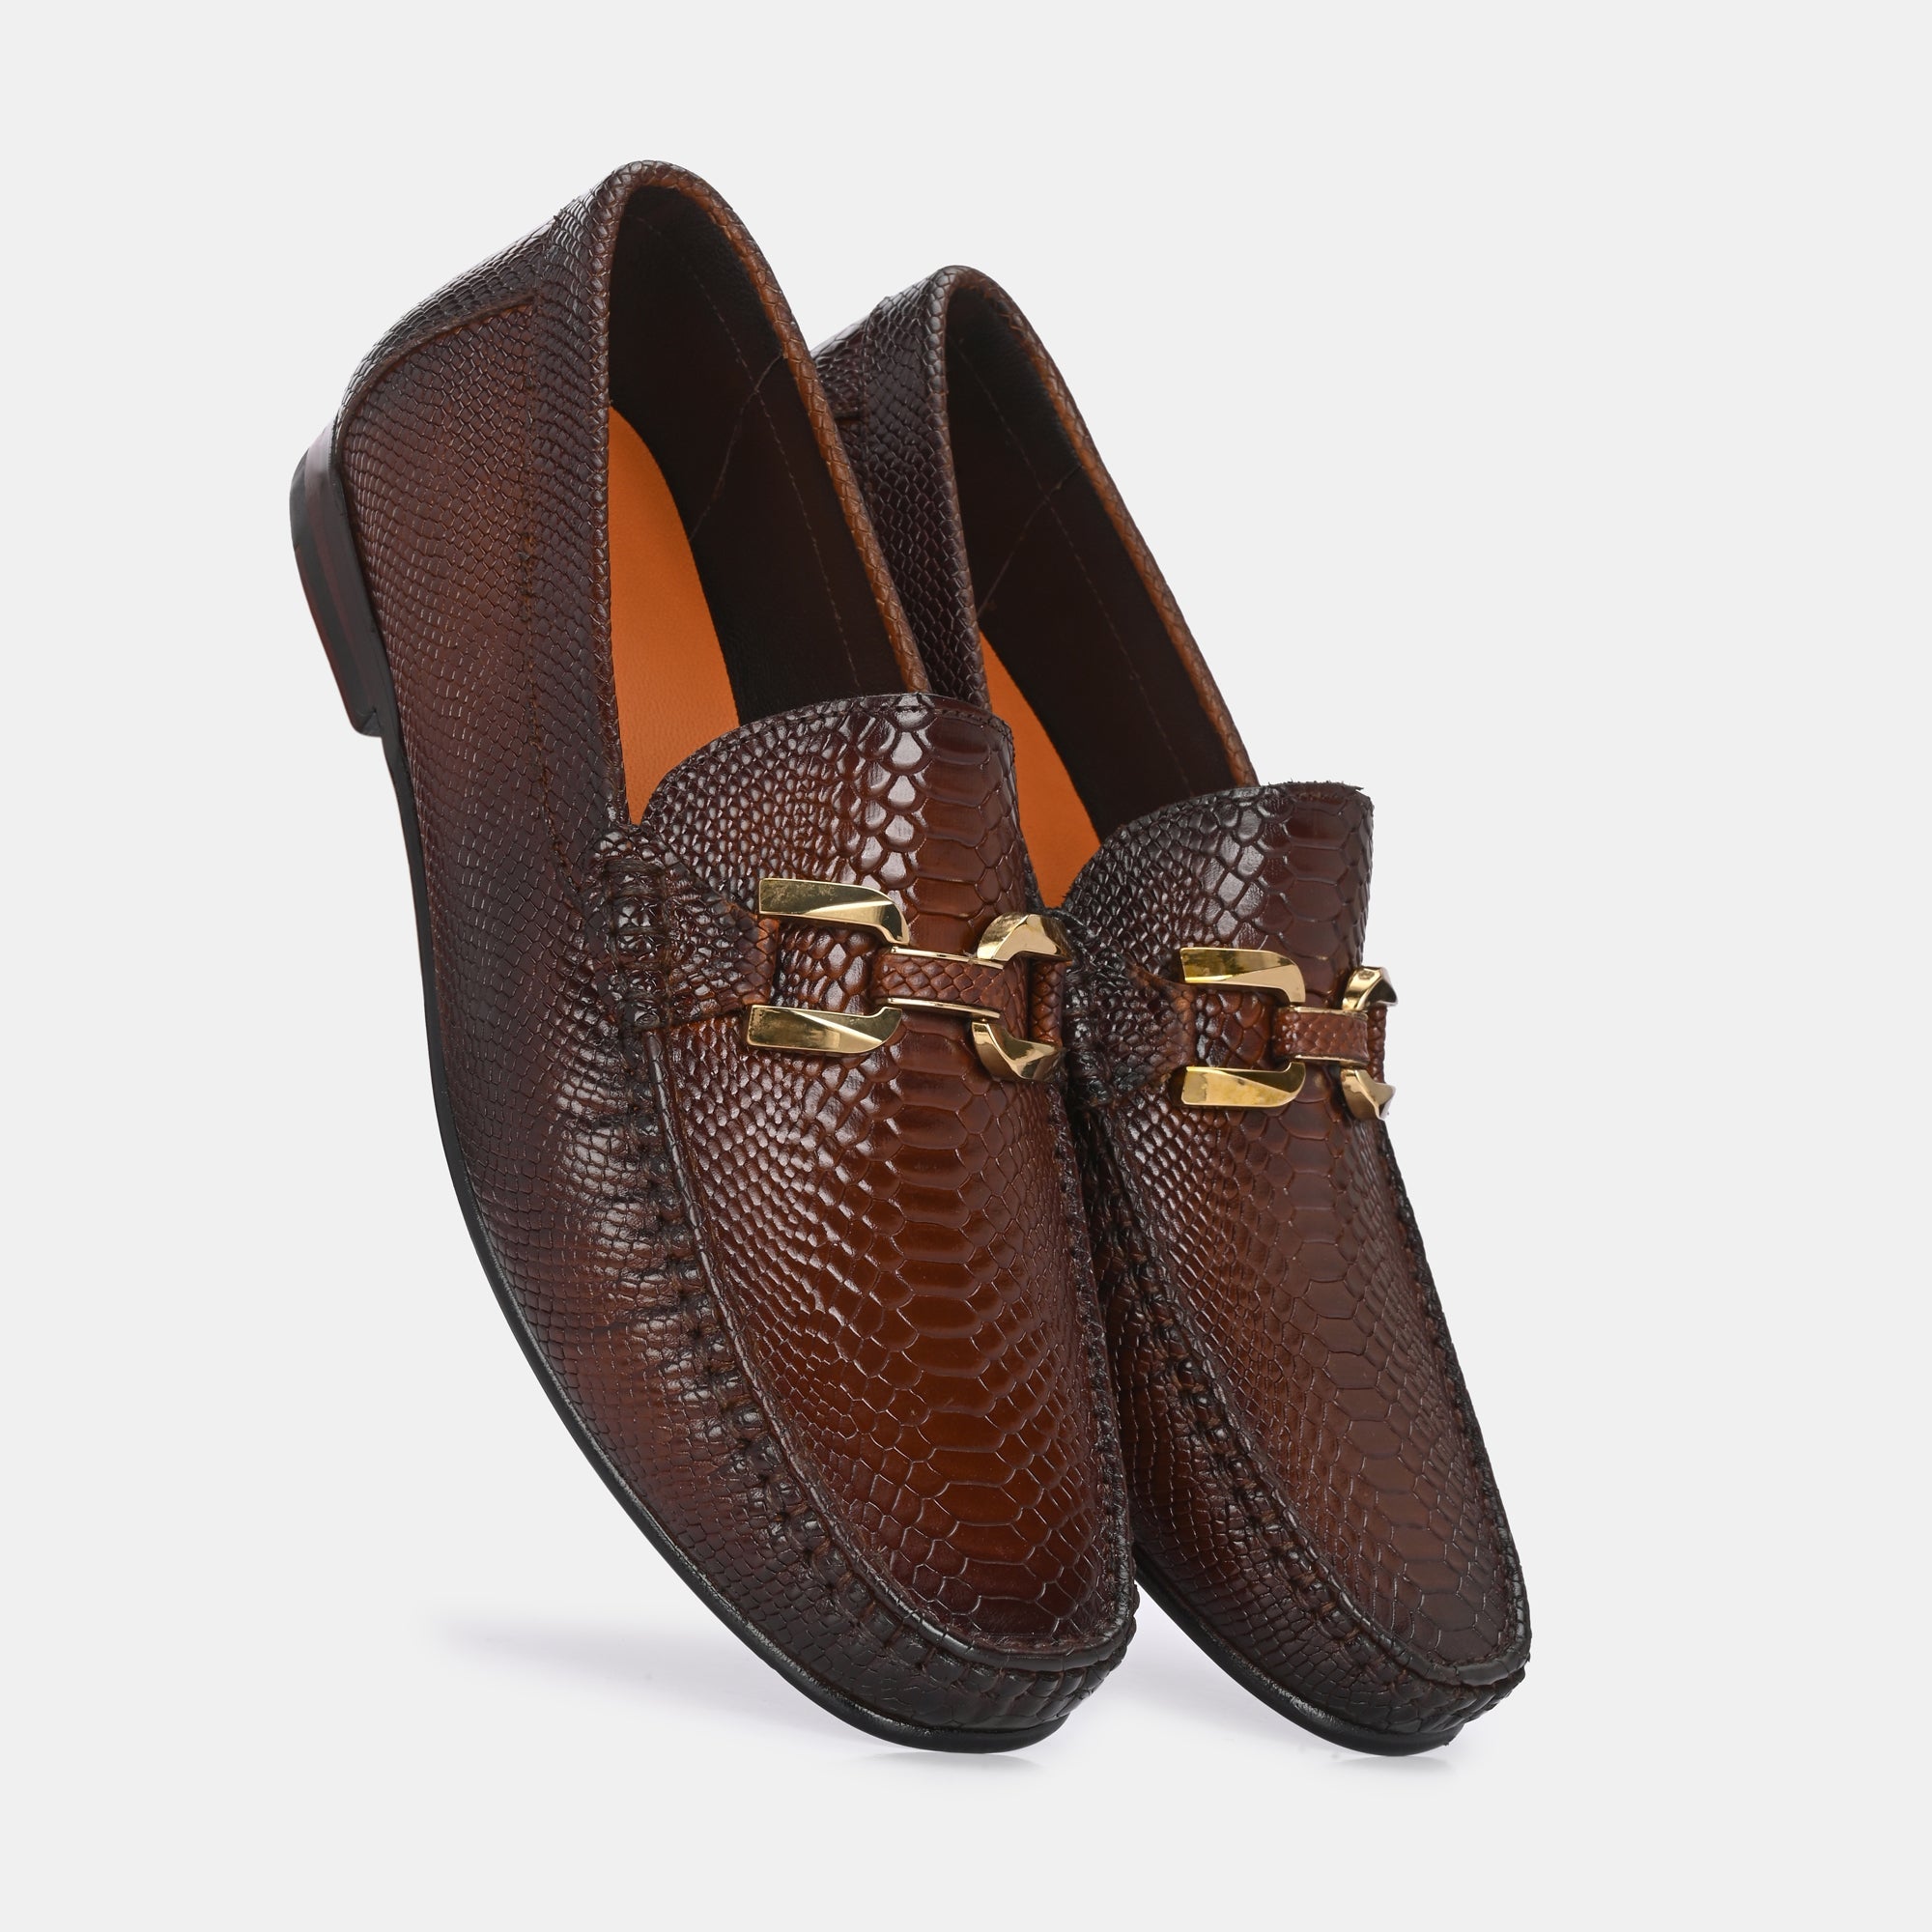 Tan Imprinted Buckled Loafers by Lafattio